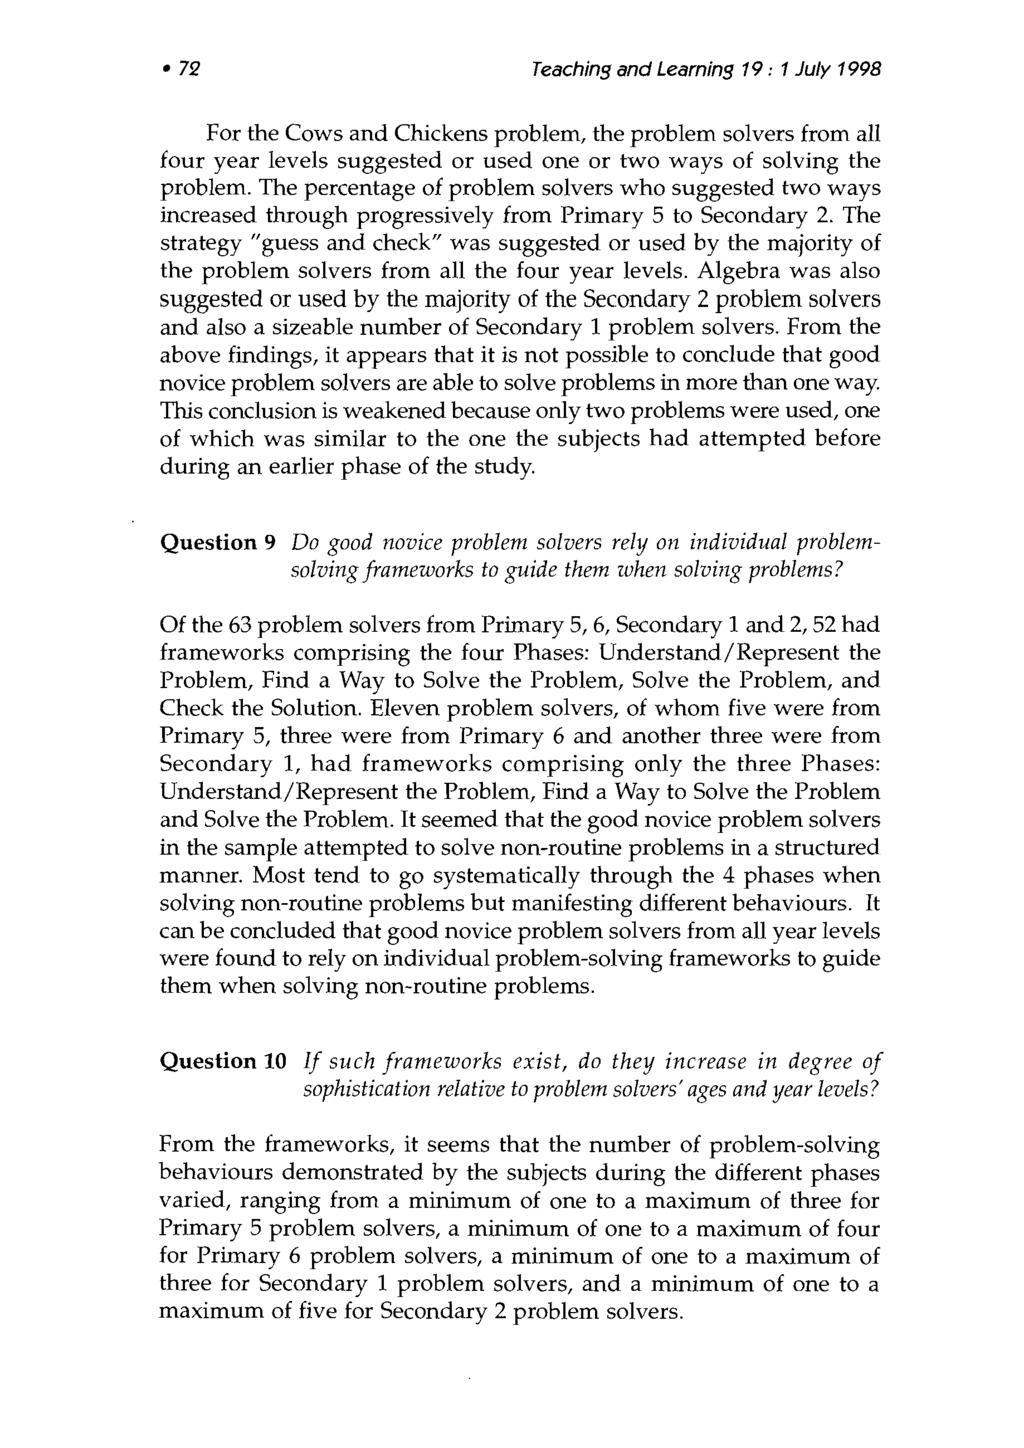 72 Teaching and Learning 19 : l July 1 998 For the Cows and Cluckens problem, the problem solvers from all four year levels suggested or used one or two ways of solving the problem.